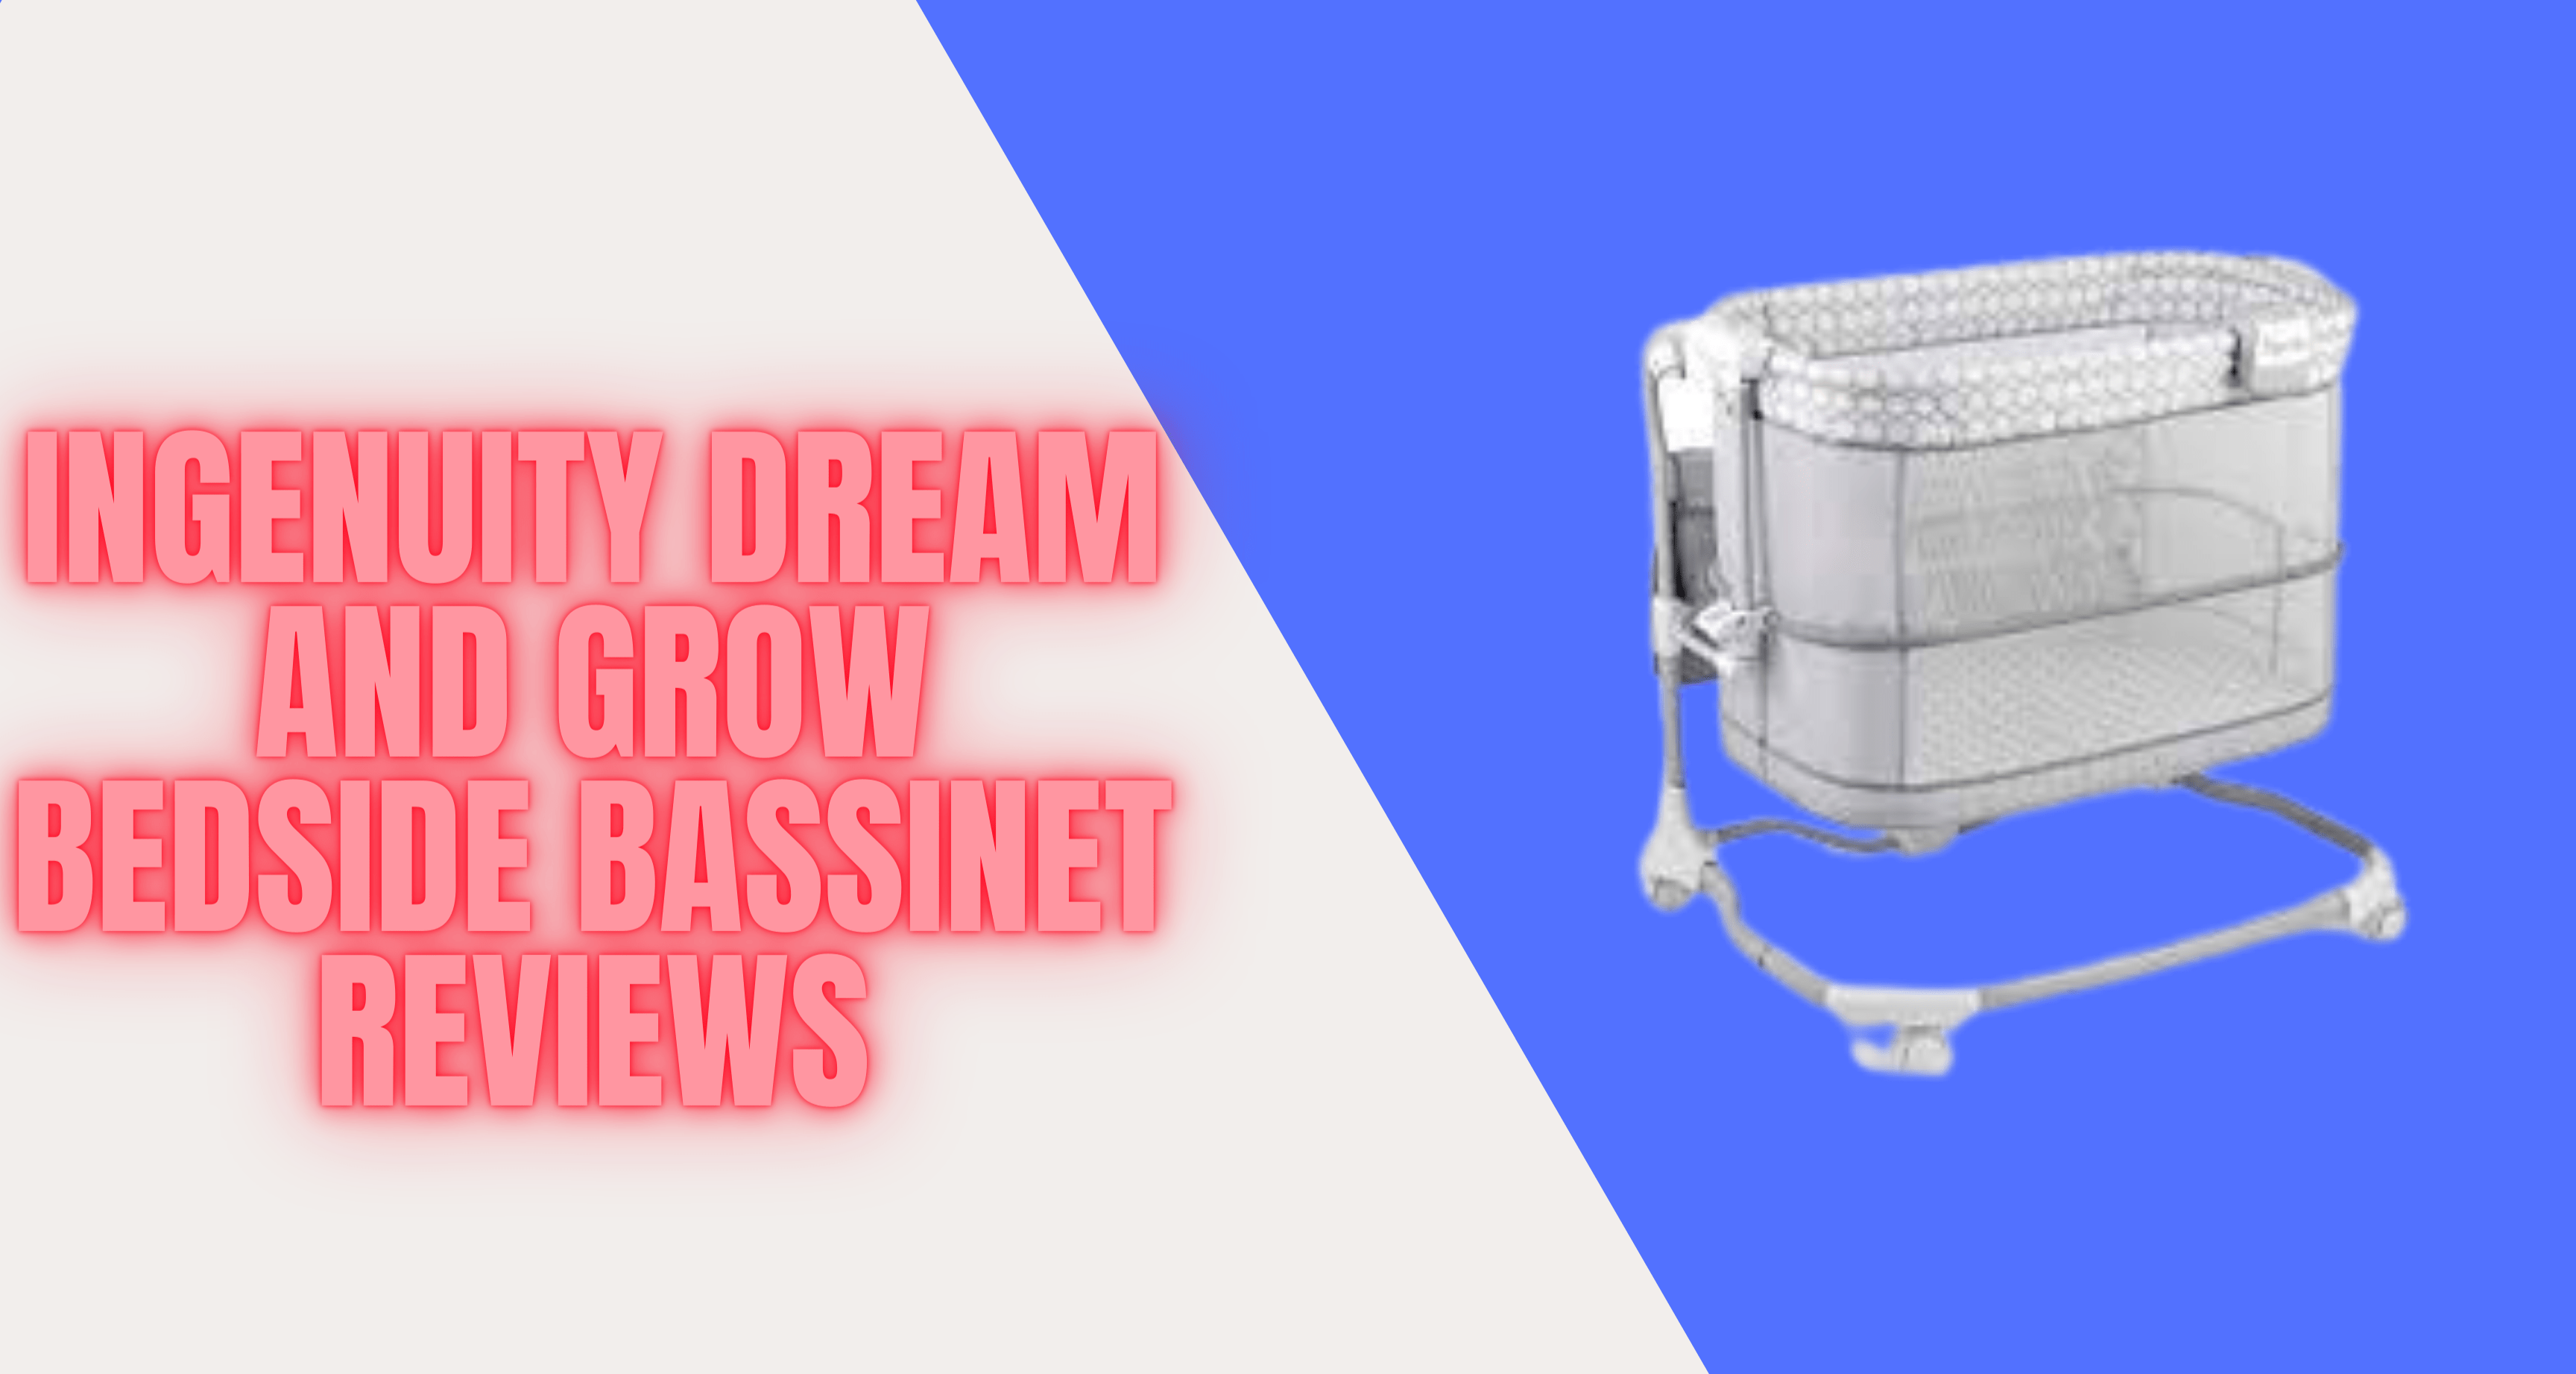 ingenuity dream and grow bedside bassinet reviews